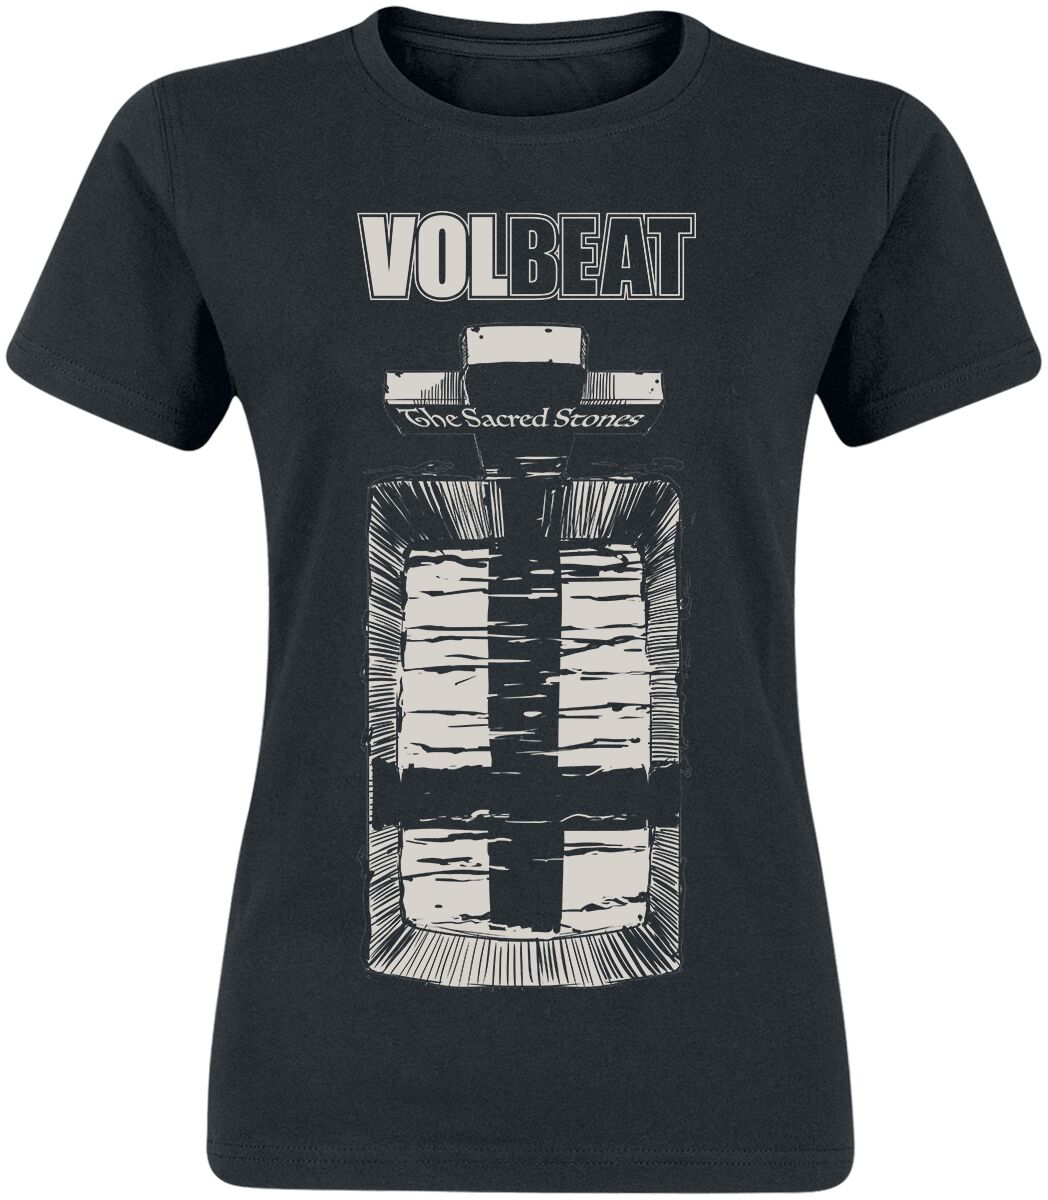 Volbeat The Scared Stones T-Shirt schwarz in L